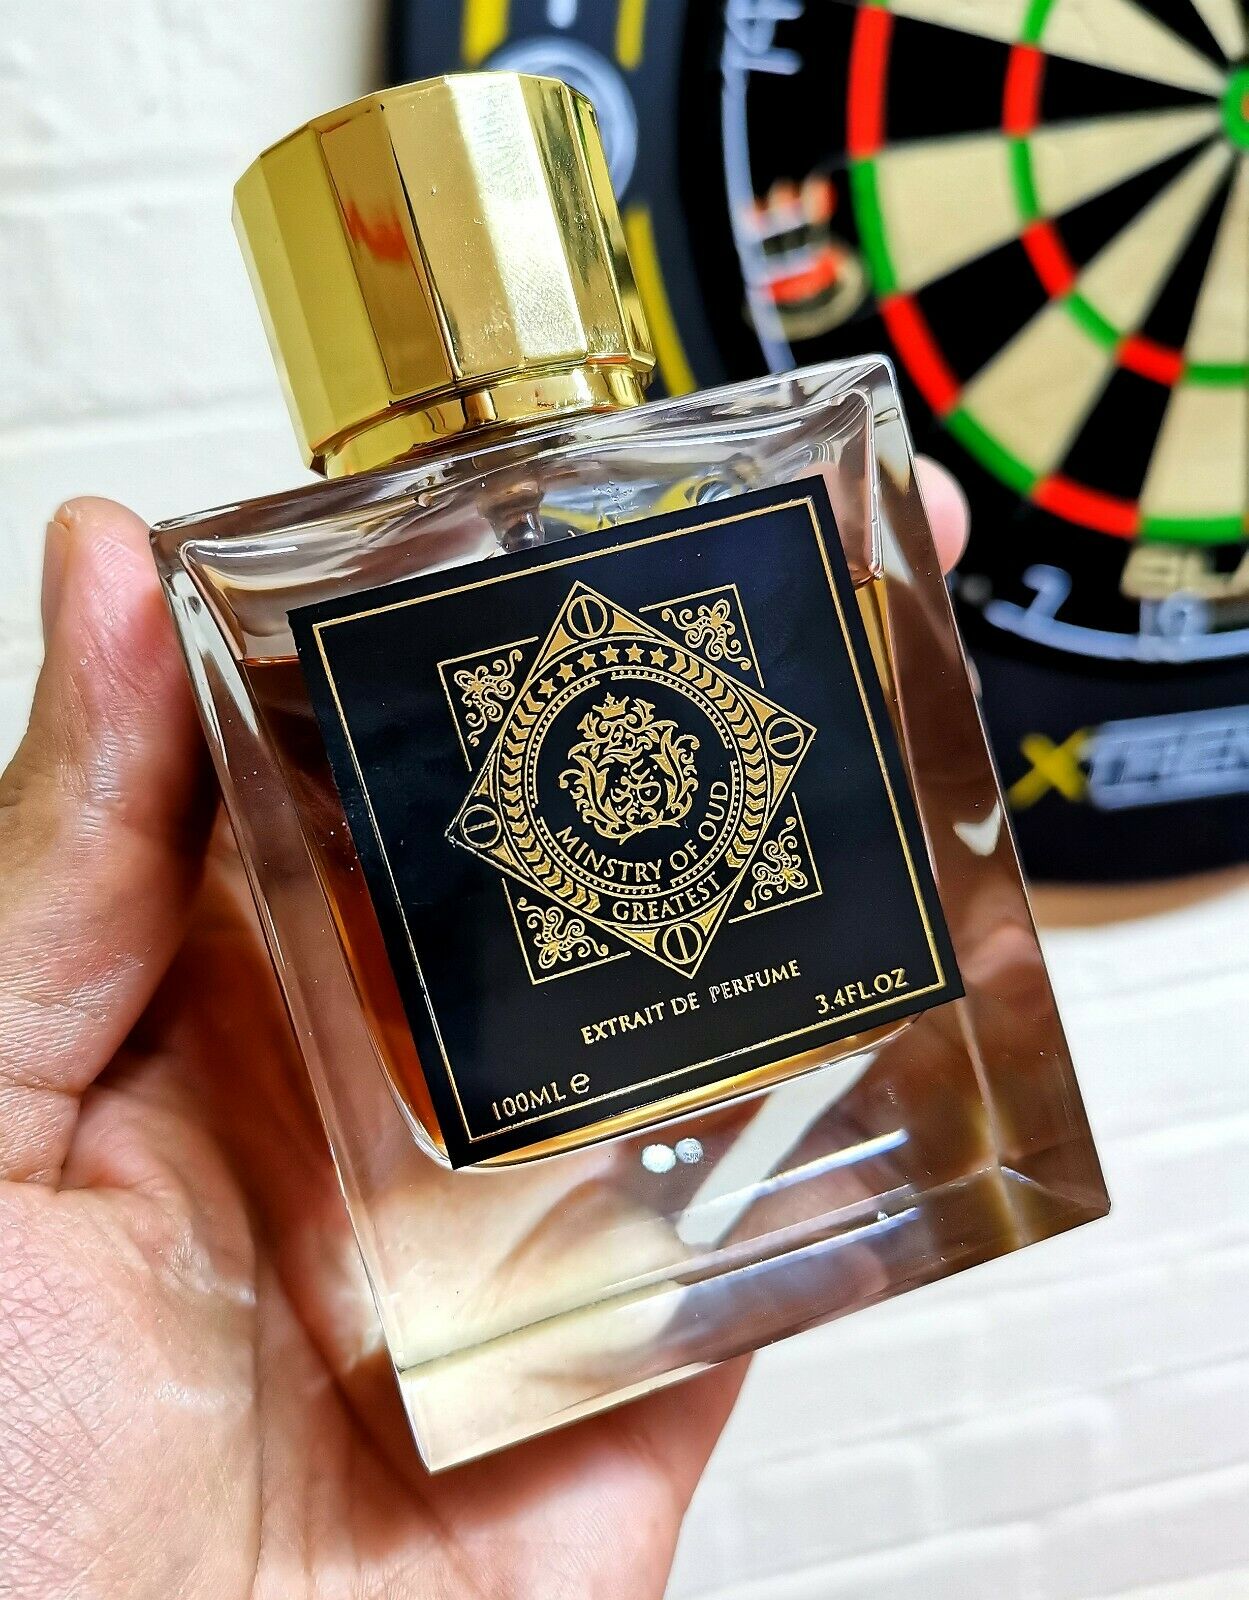 The Best Oud fragrance - MINISTRY OF OUD GREATEST - 100ml EDP -